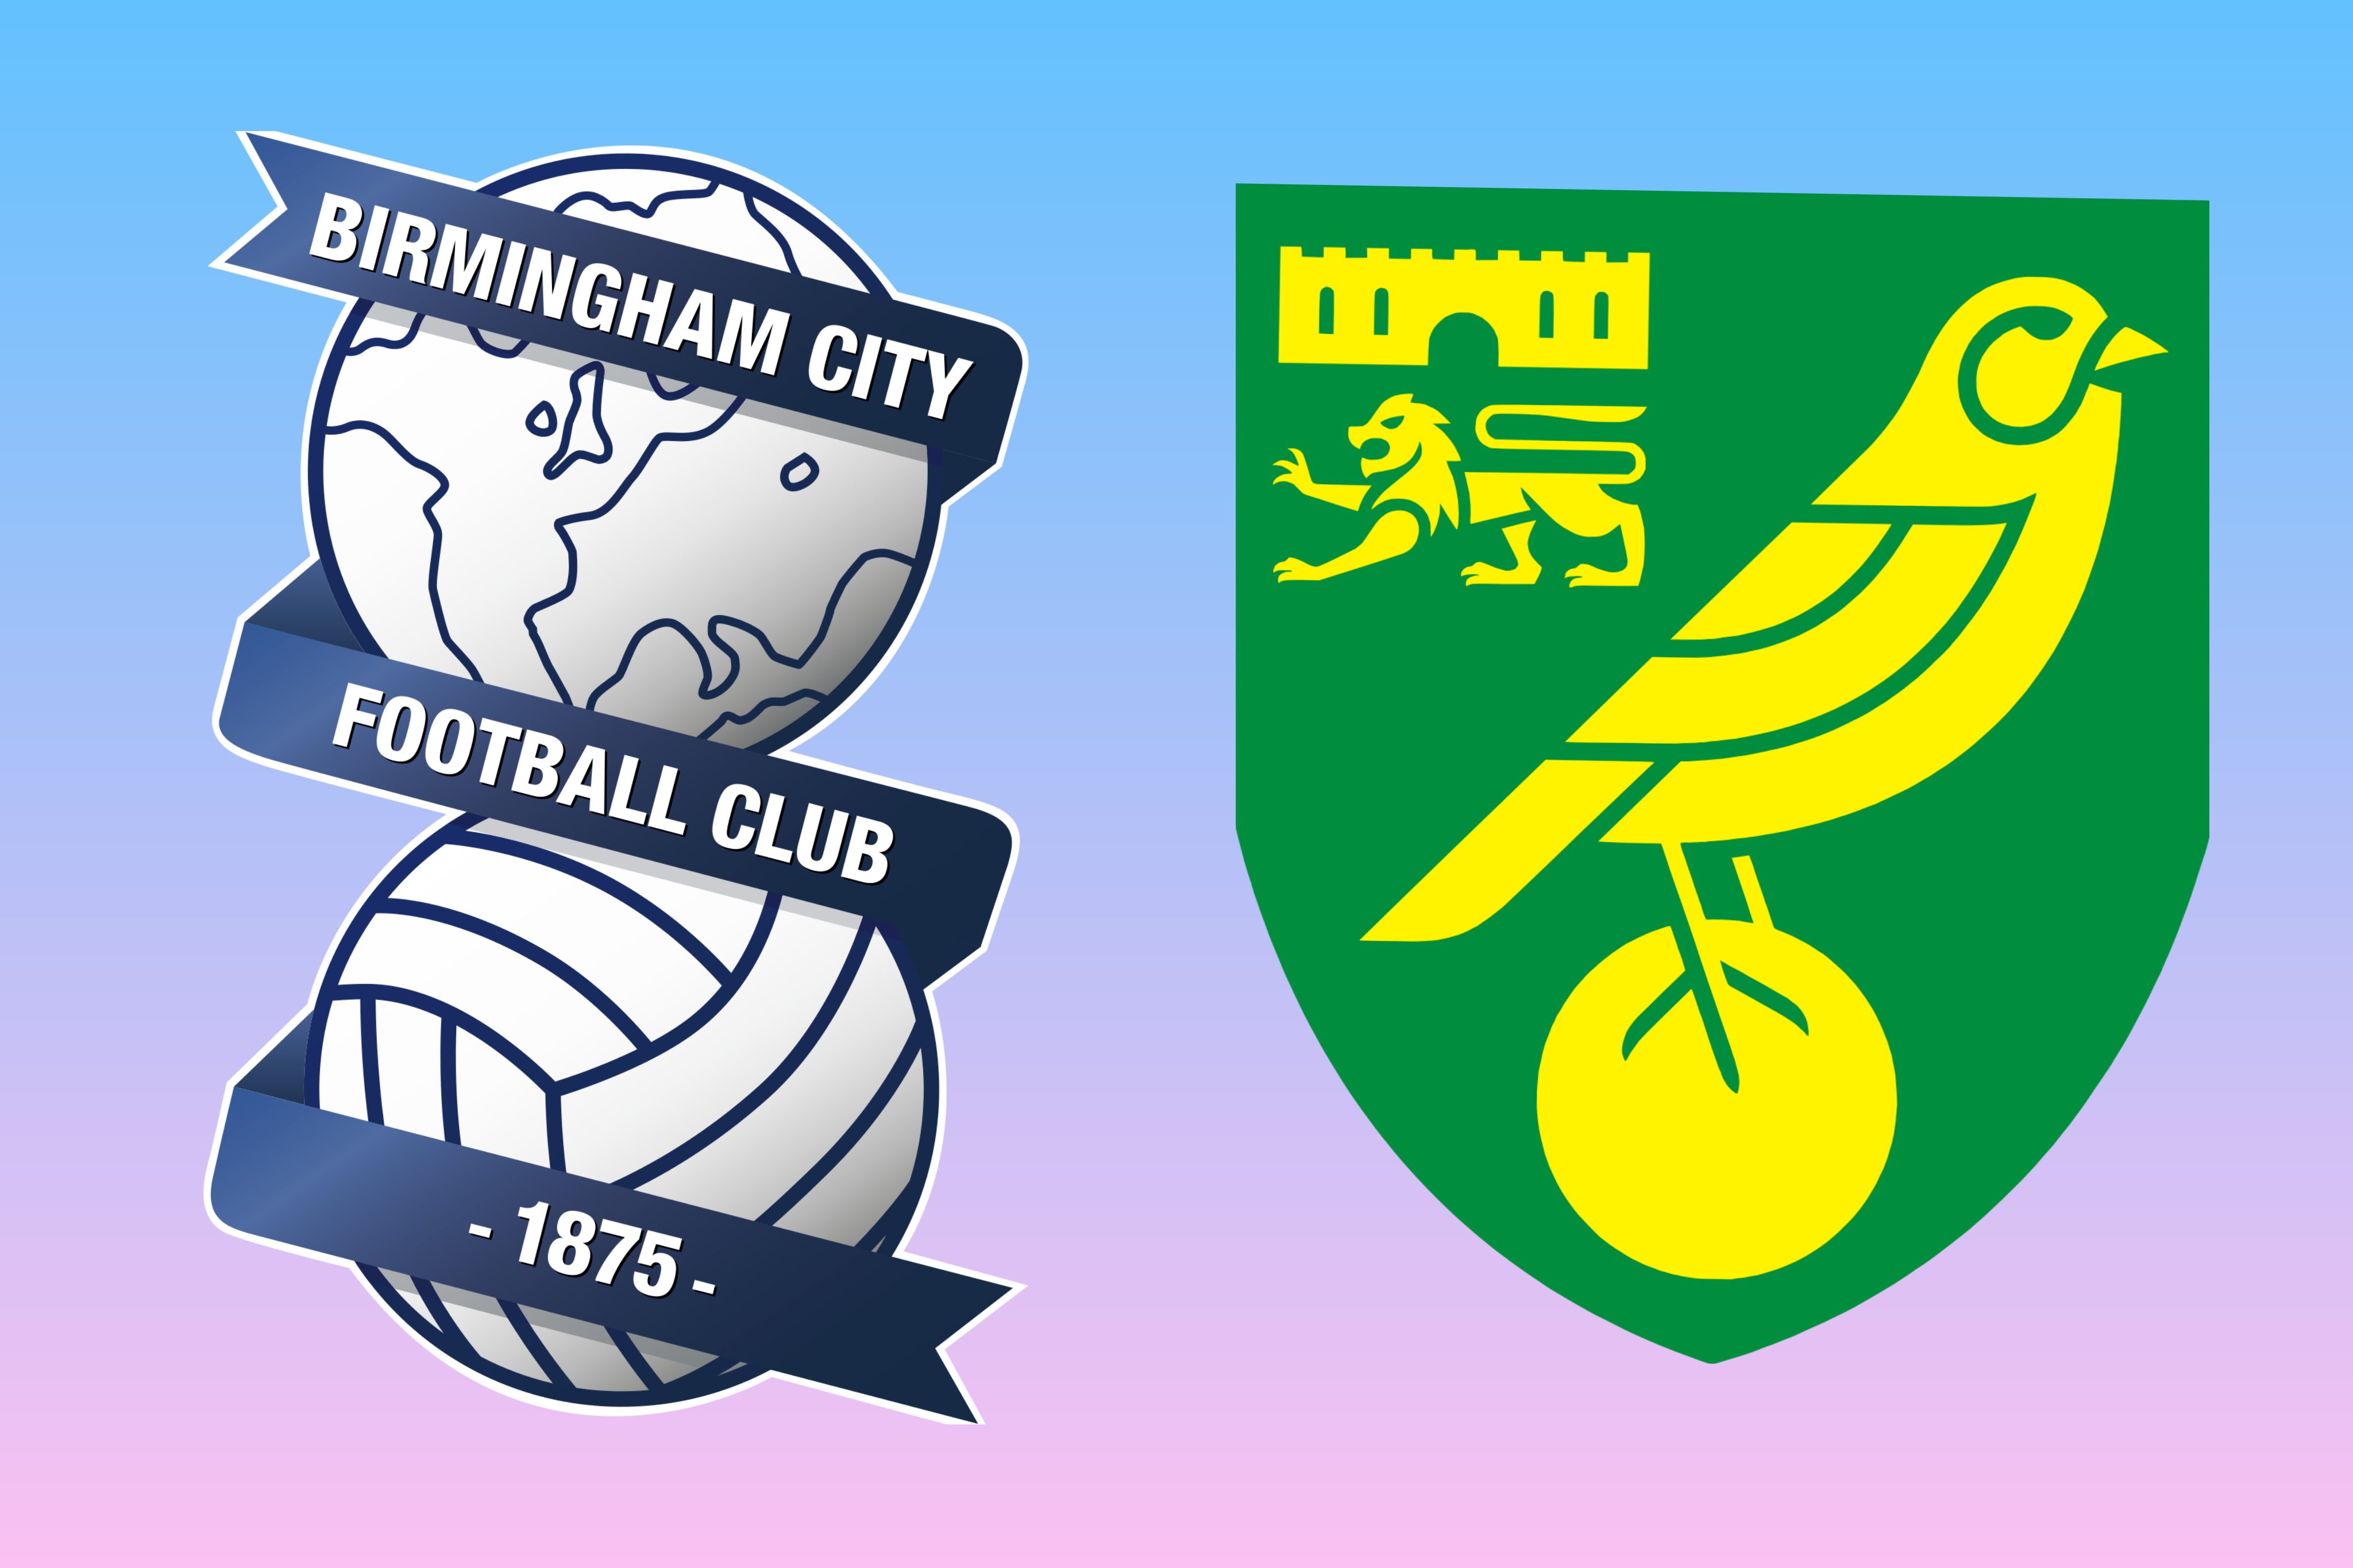 Birmingham City vs Norwich Prediction: Statistical Analysis of Goals, Fouls and Winner